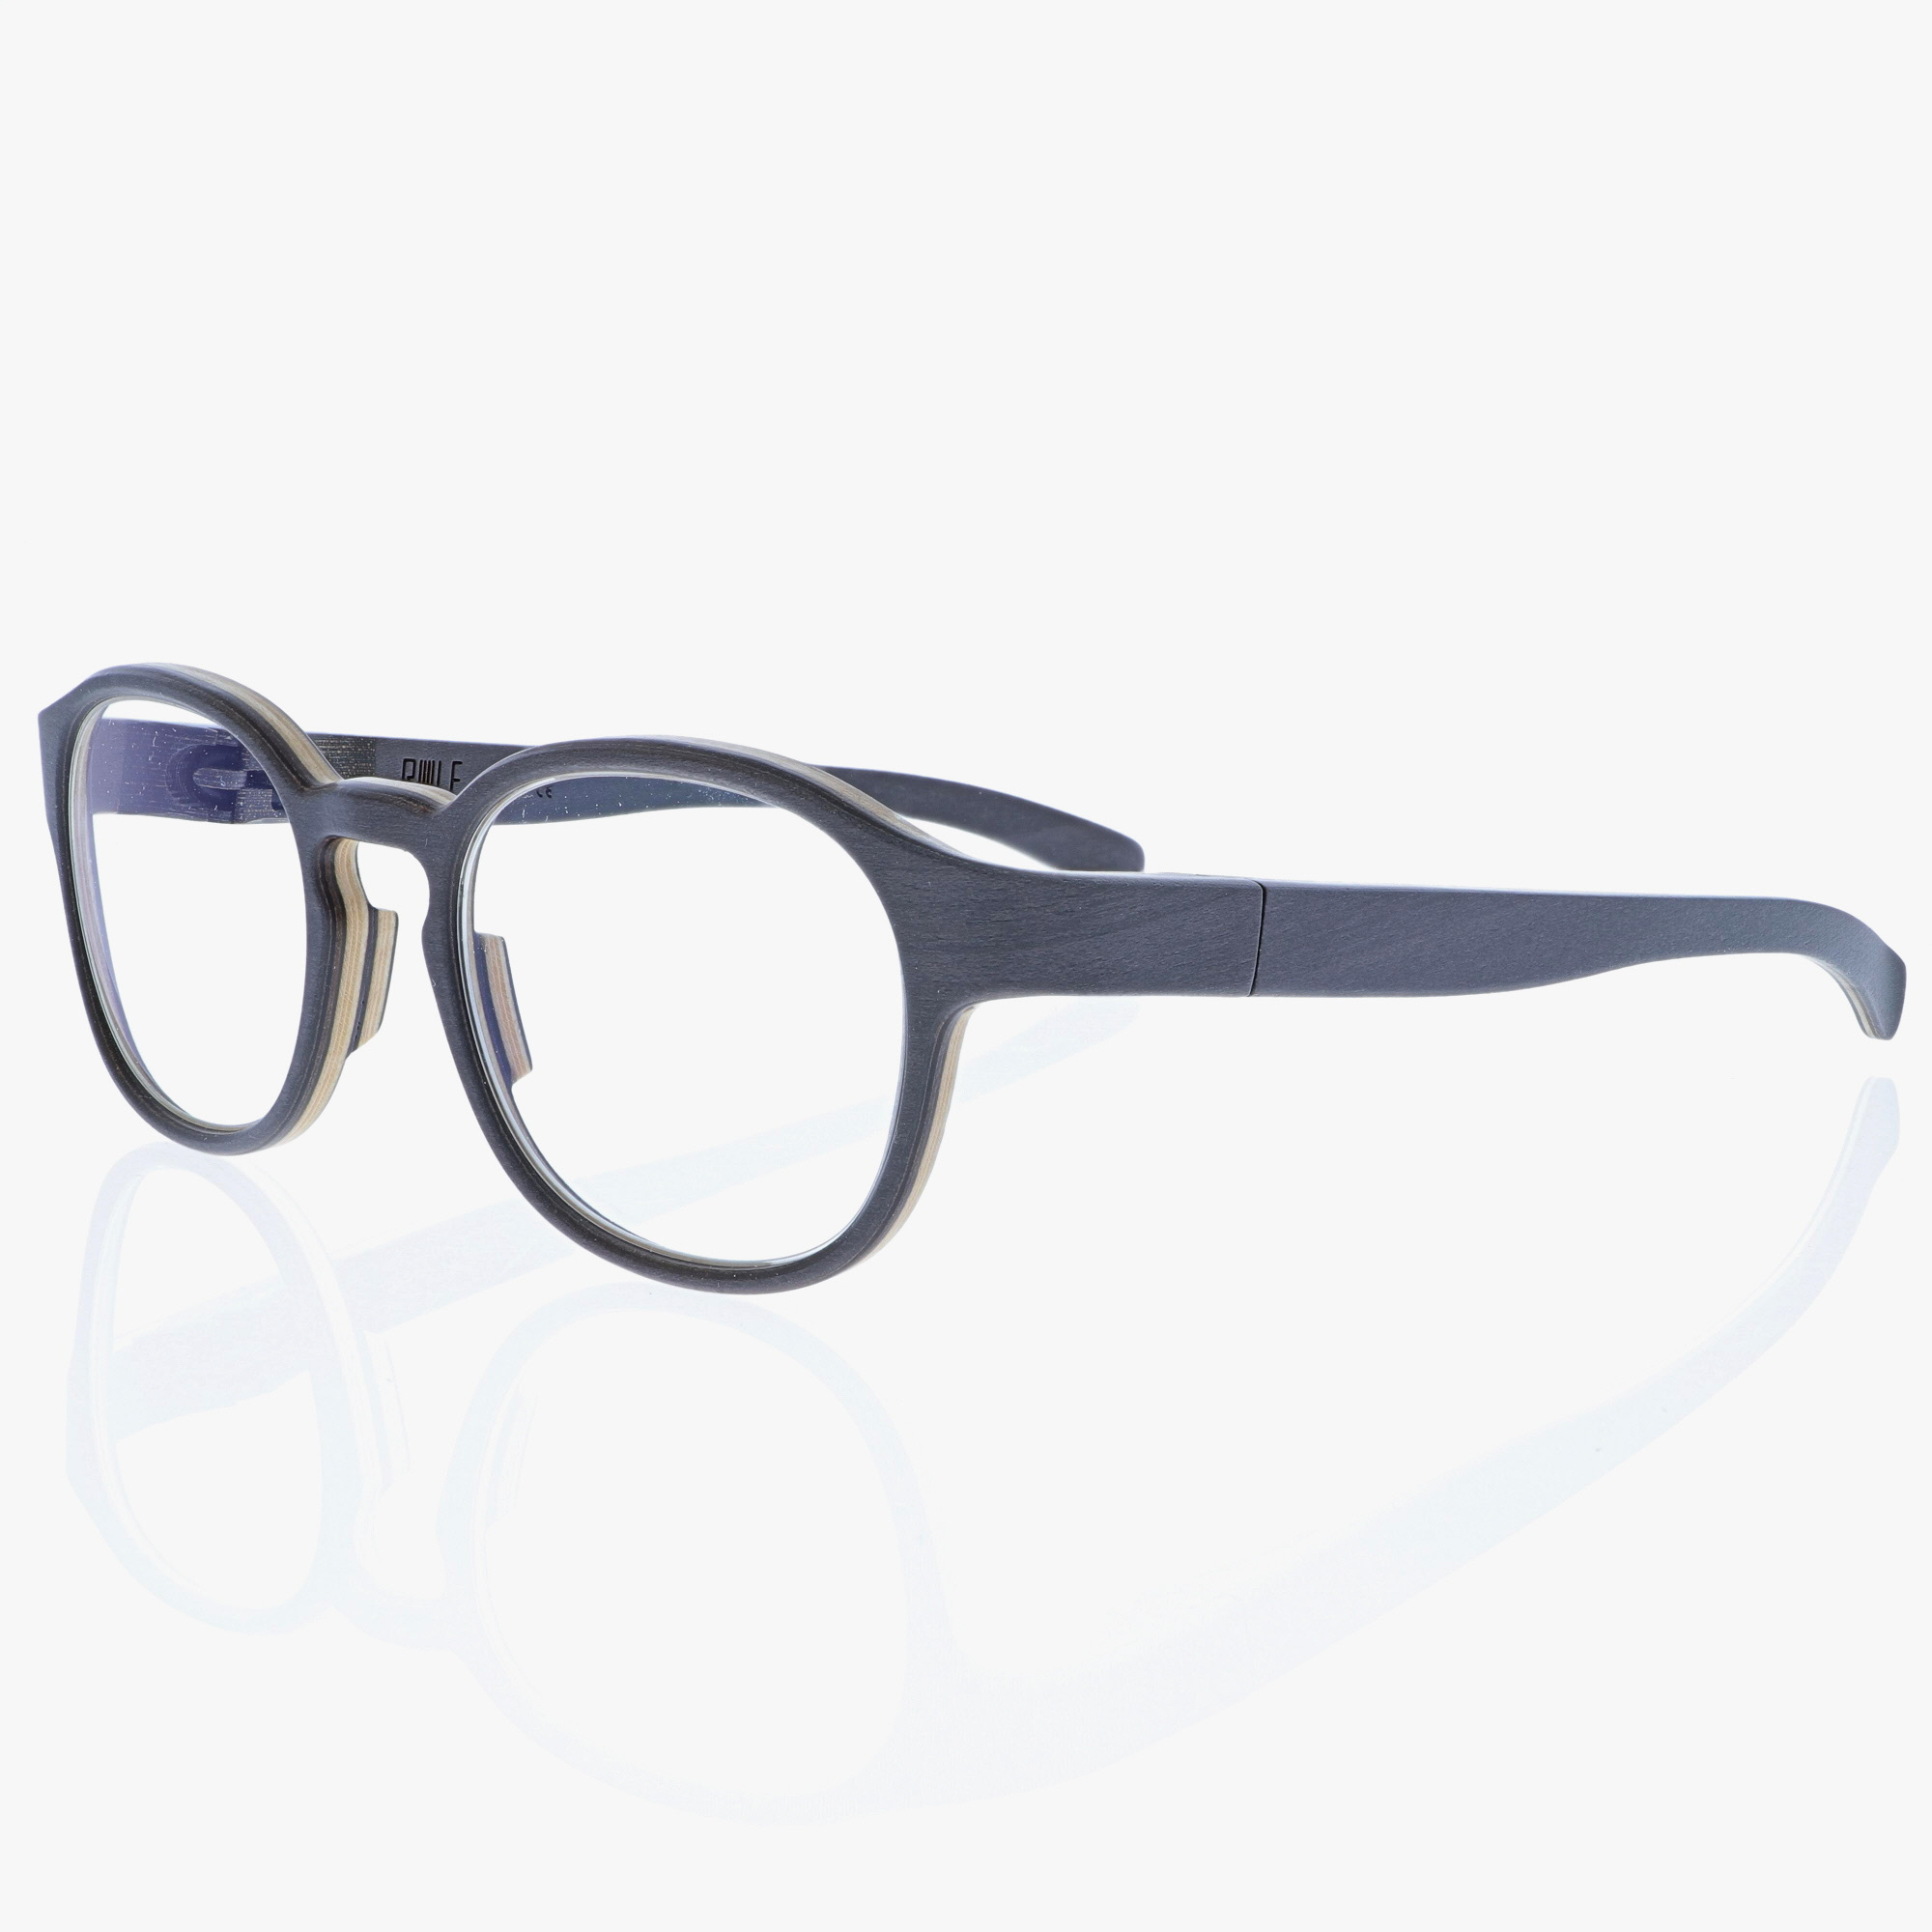 ROLF SPECTACLES / CLIPPER / SILBER-AHORN